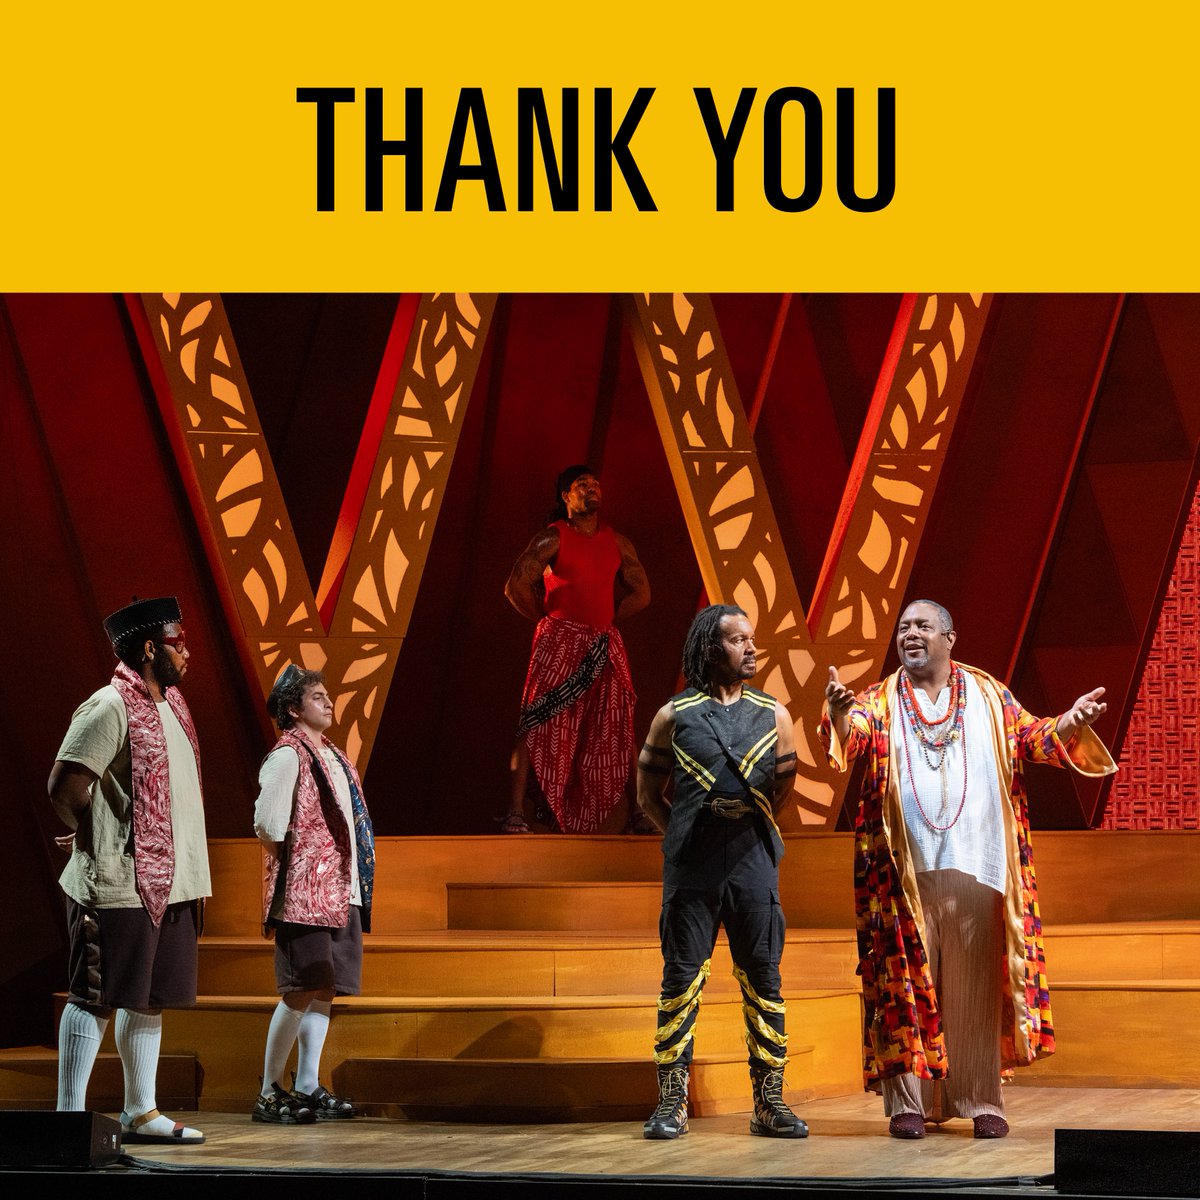 As we approach our final performance of Malvolio, we want to extend our most sincere gratitude to all of you who have come and been a part of this show with us. Uptown Shakespeare In The Park would be nothing without our audiences. You’ve come and laughed, cried, danced and sang